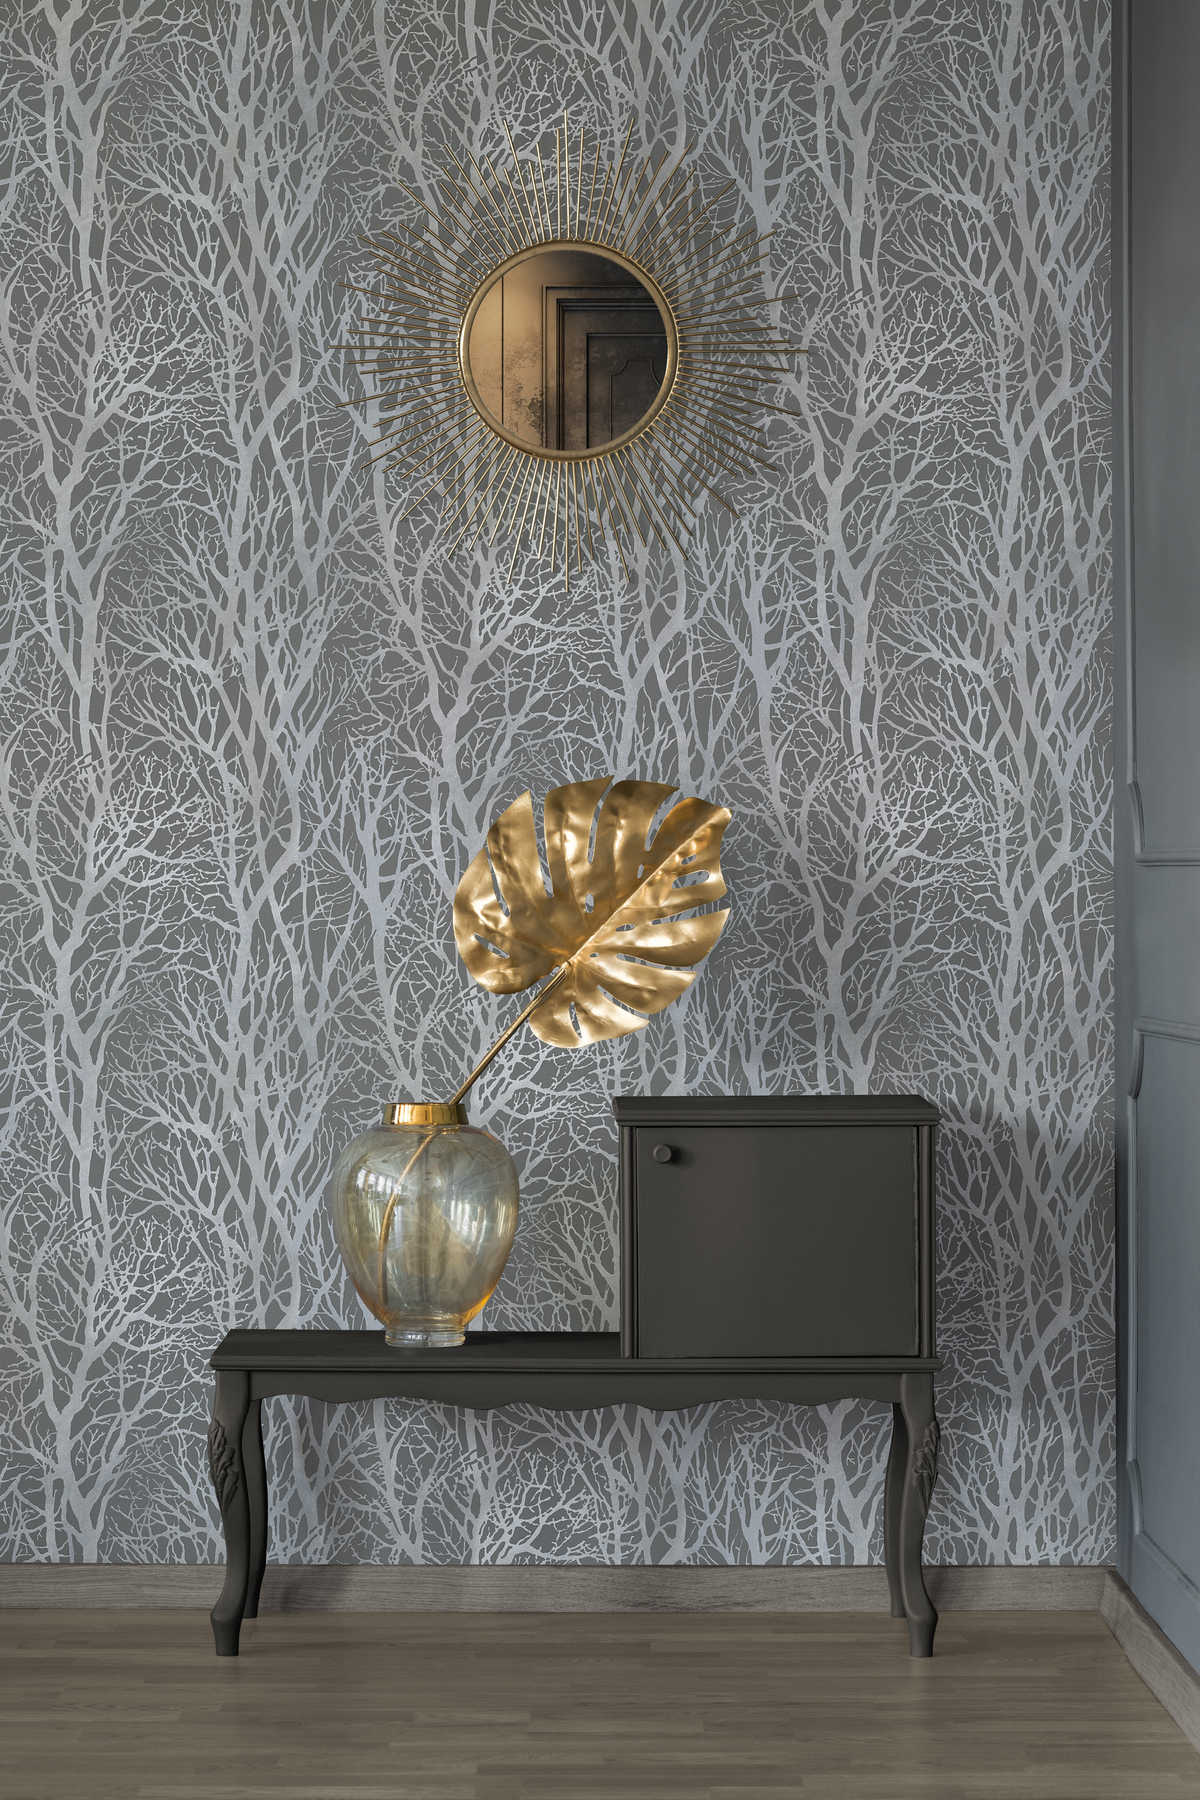             Anthracite wallpaper with branch motif & metallic effect - silver, grey
        